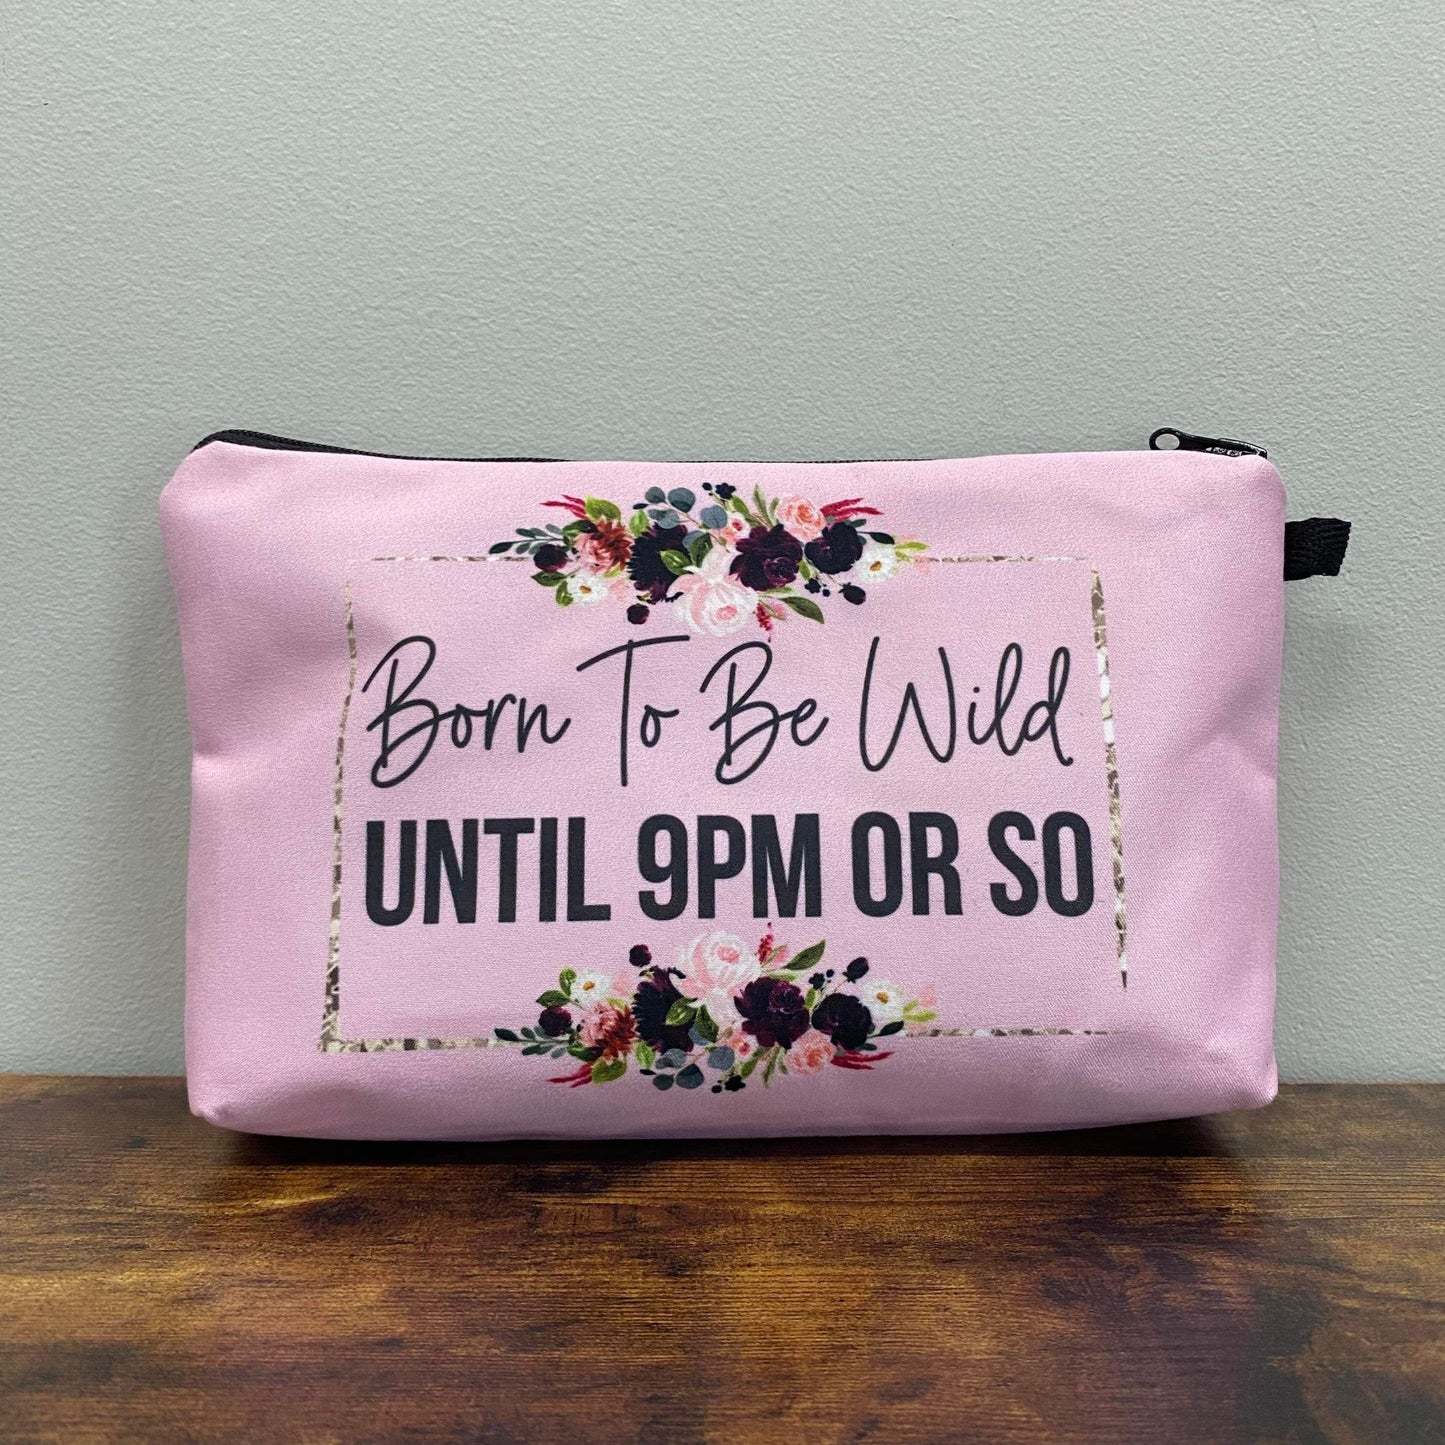 Born To Be Wild - Water-Resistant Multi-Use Pouch